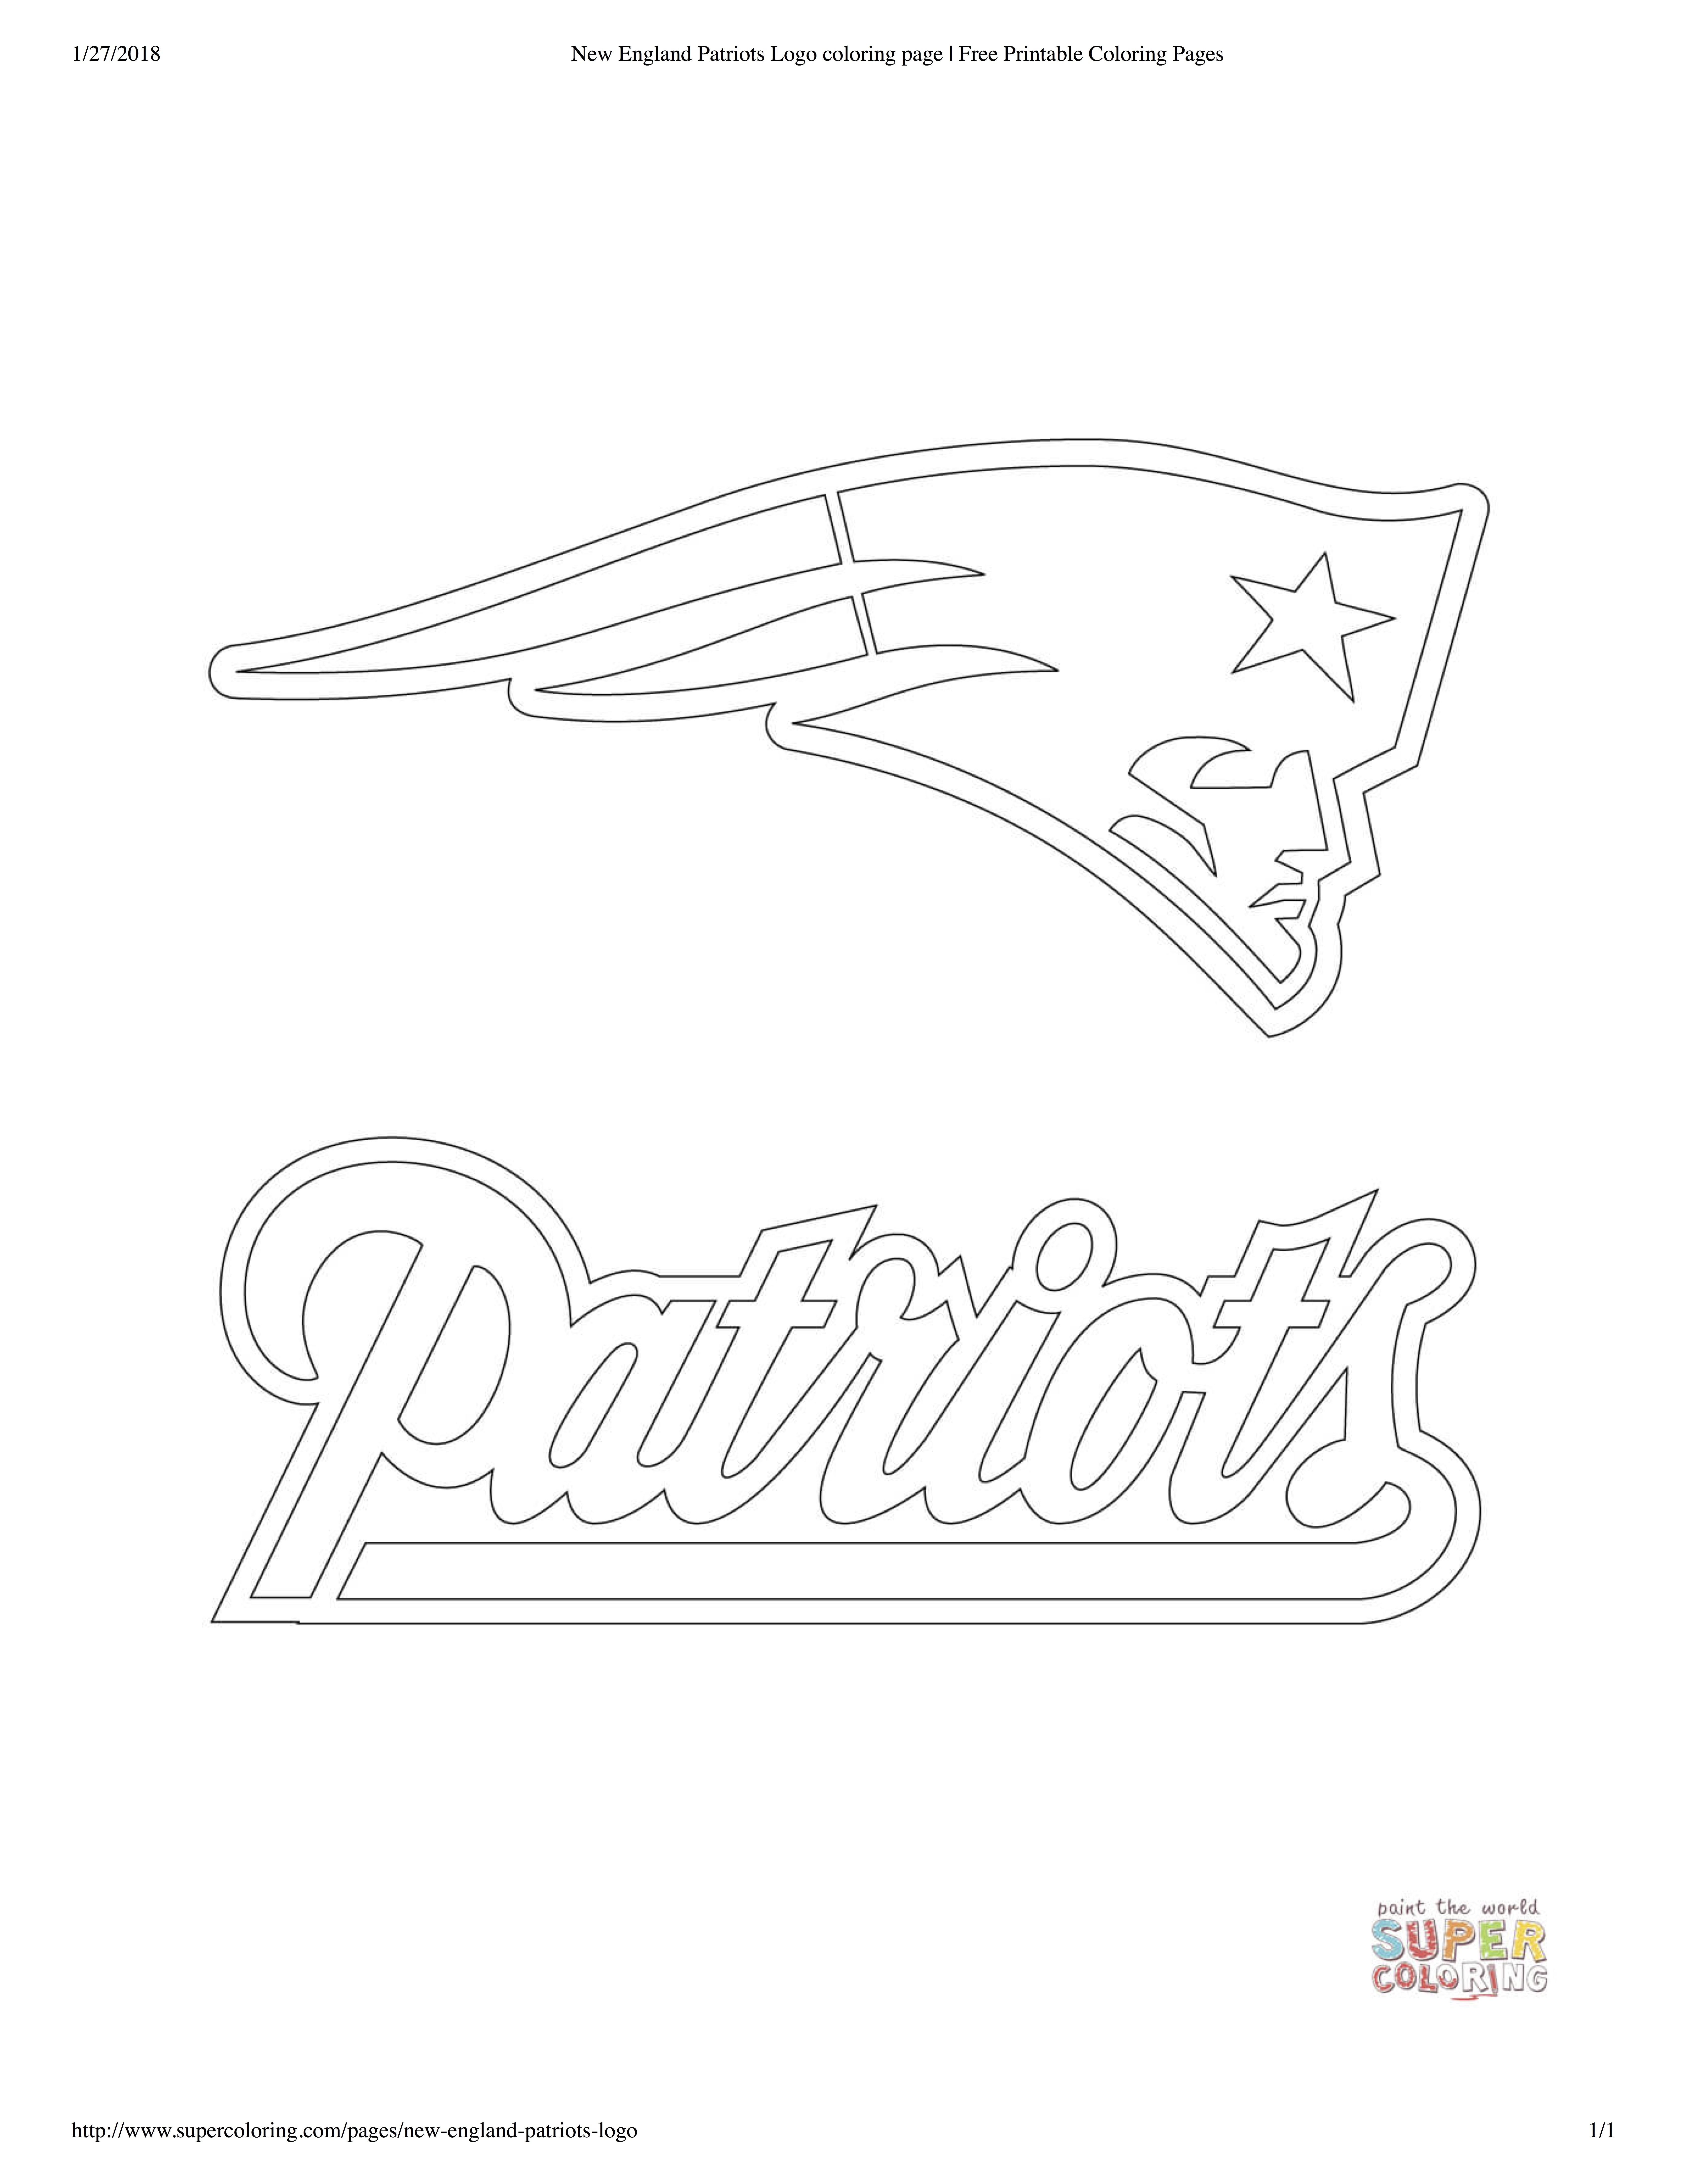 Super Bowl Coloring Pages Free Patriots Coloring Sheets And Pages Metrowest Mamas